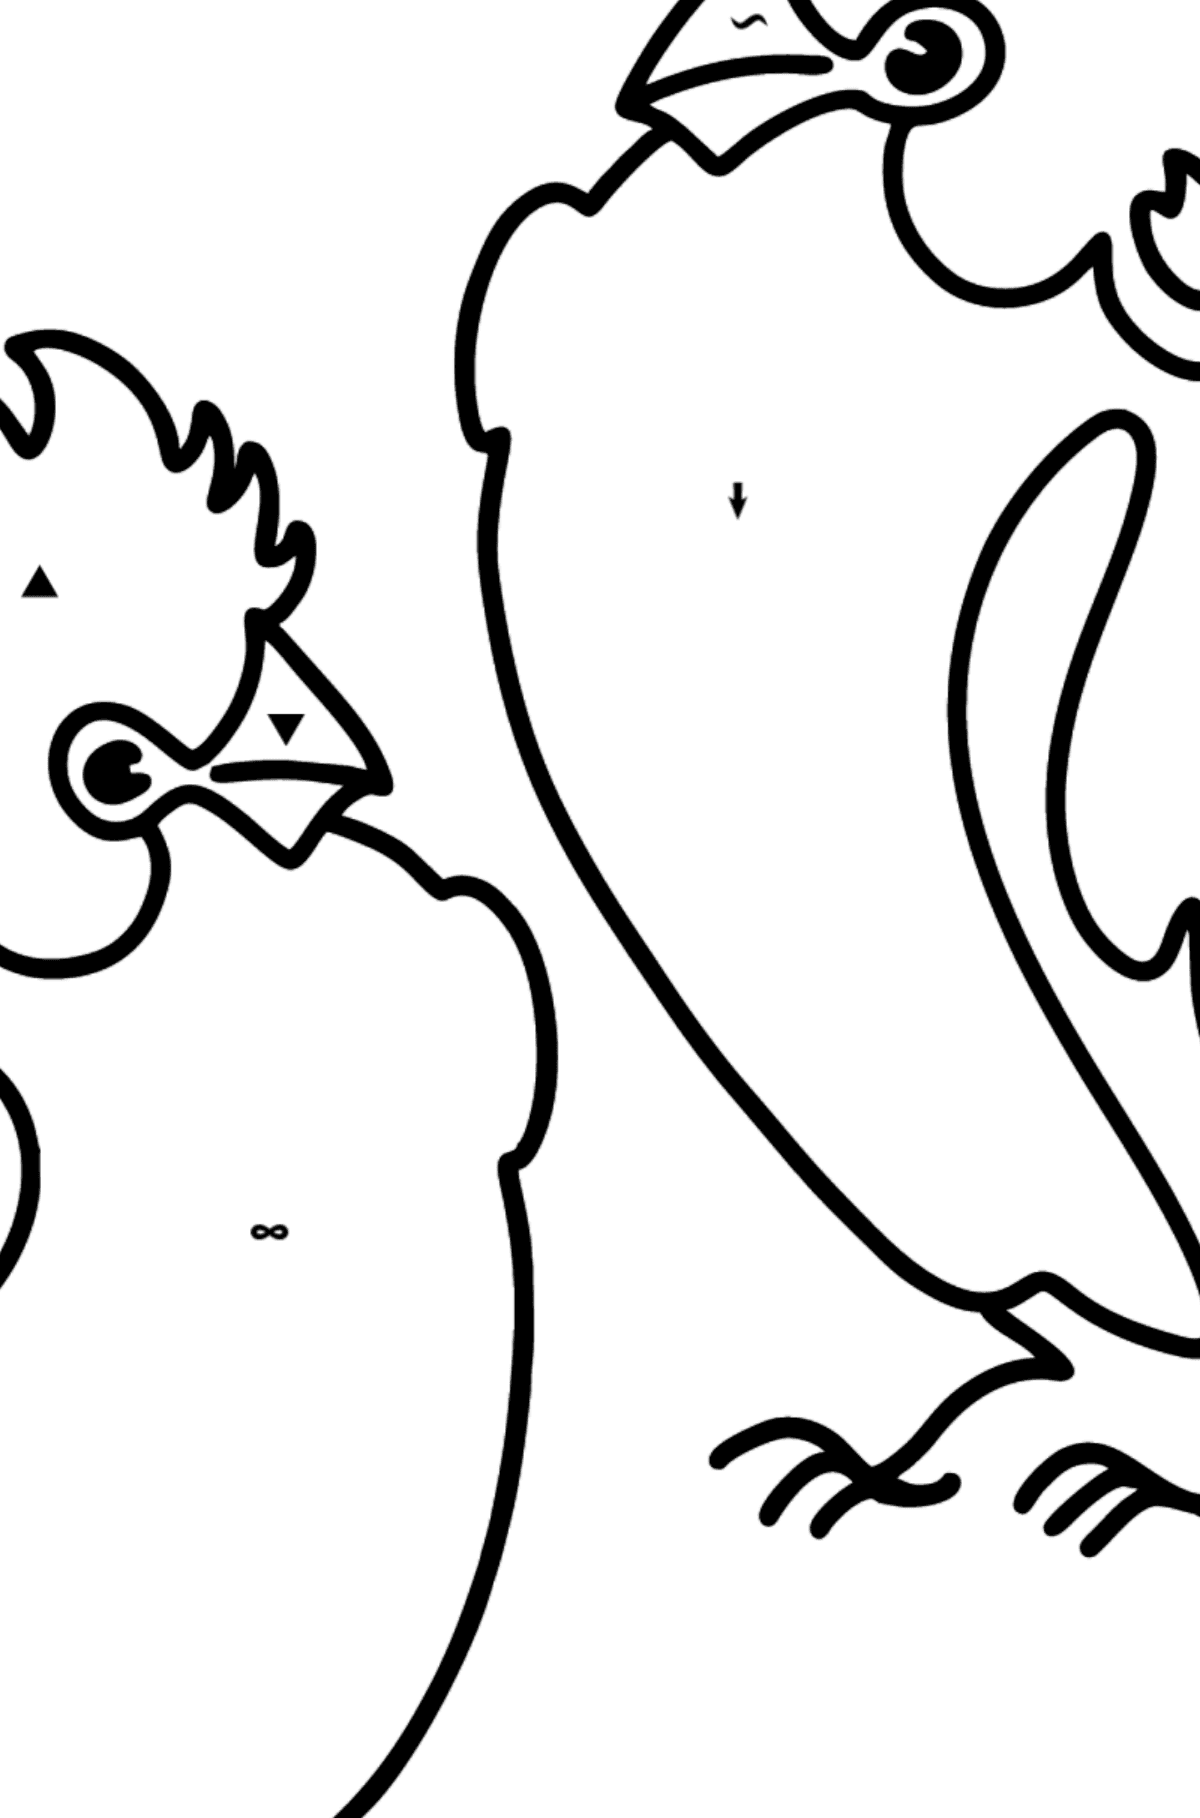 2 Parrots coloring page - Coloring by Symbols for Kids